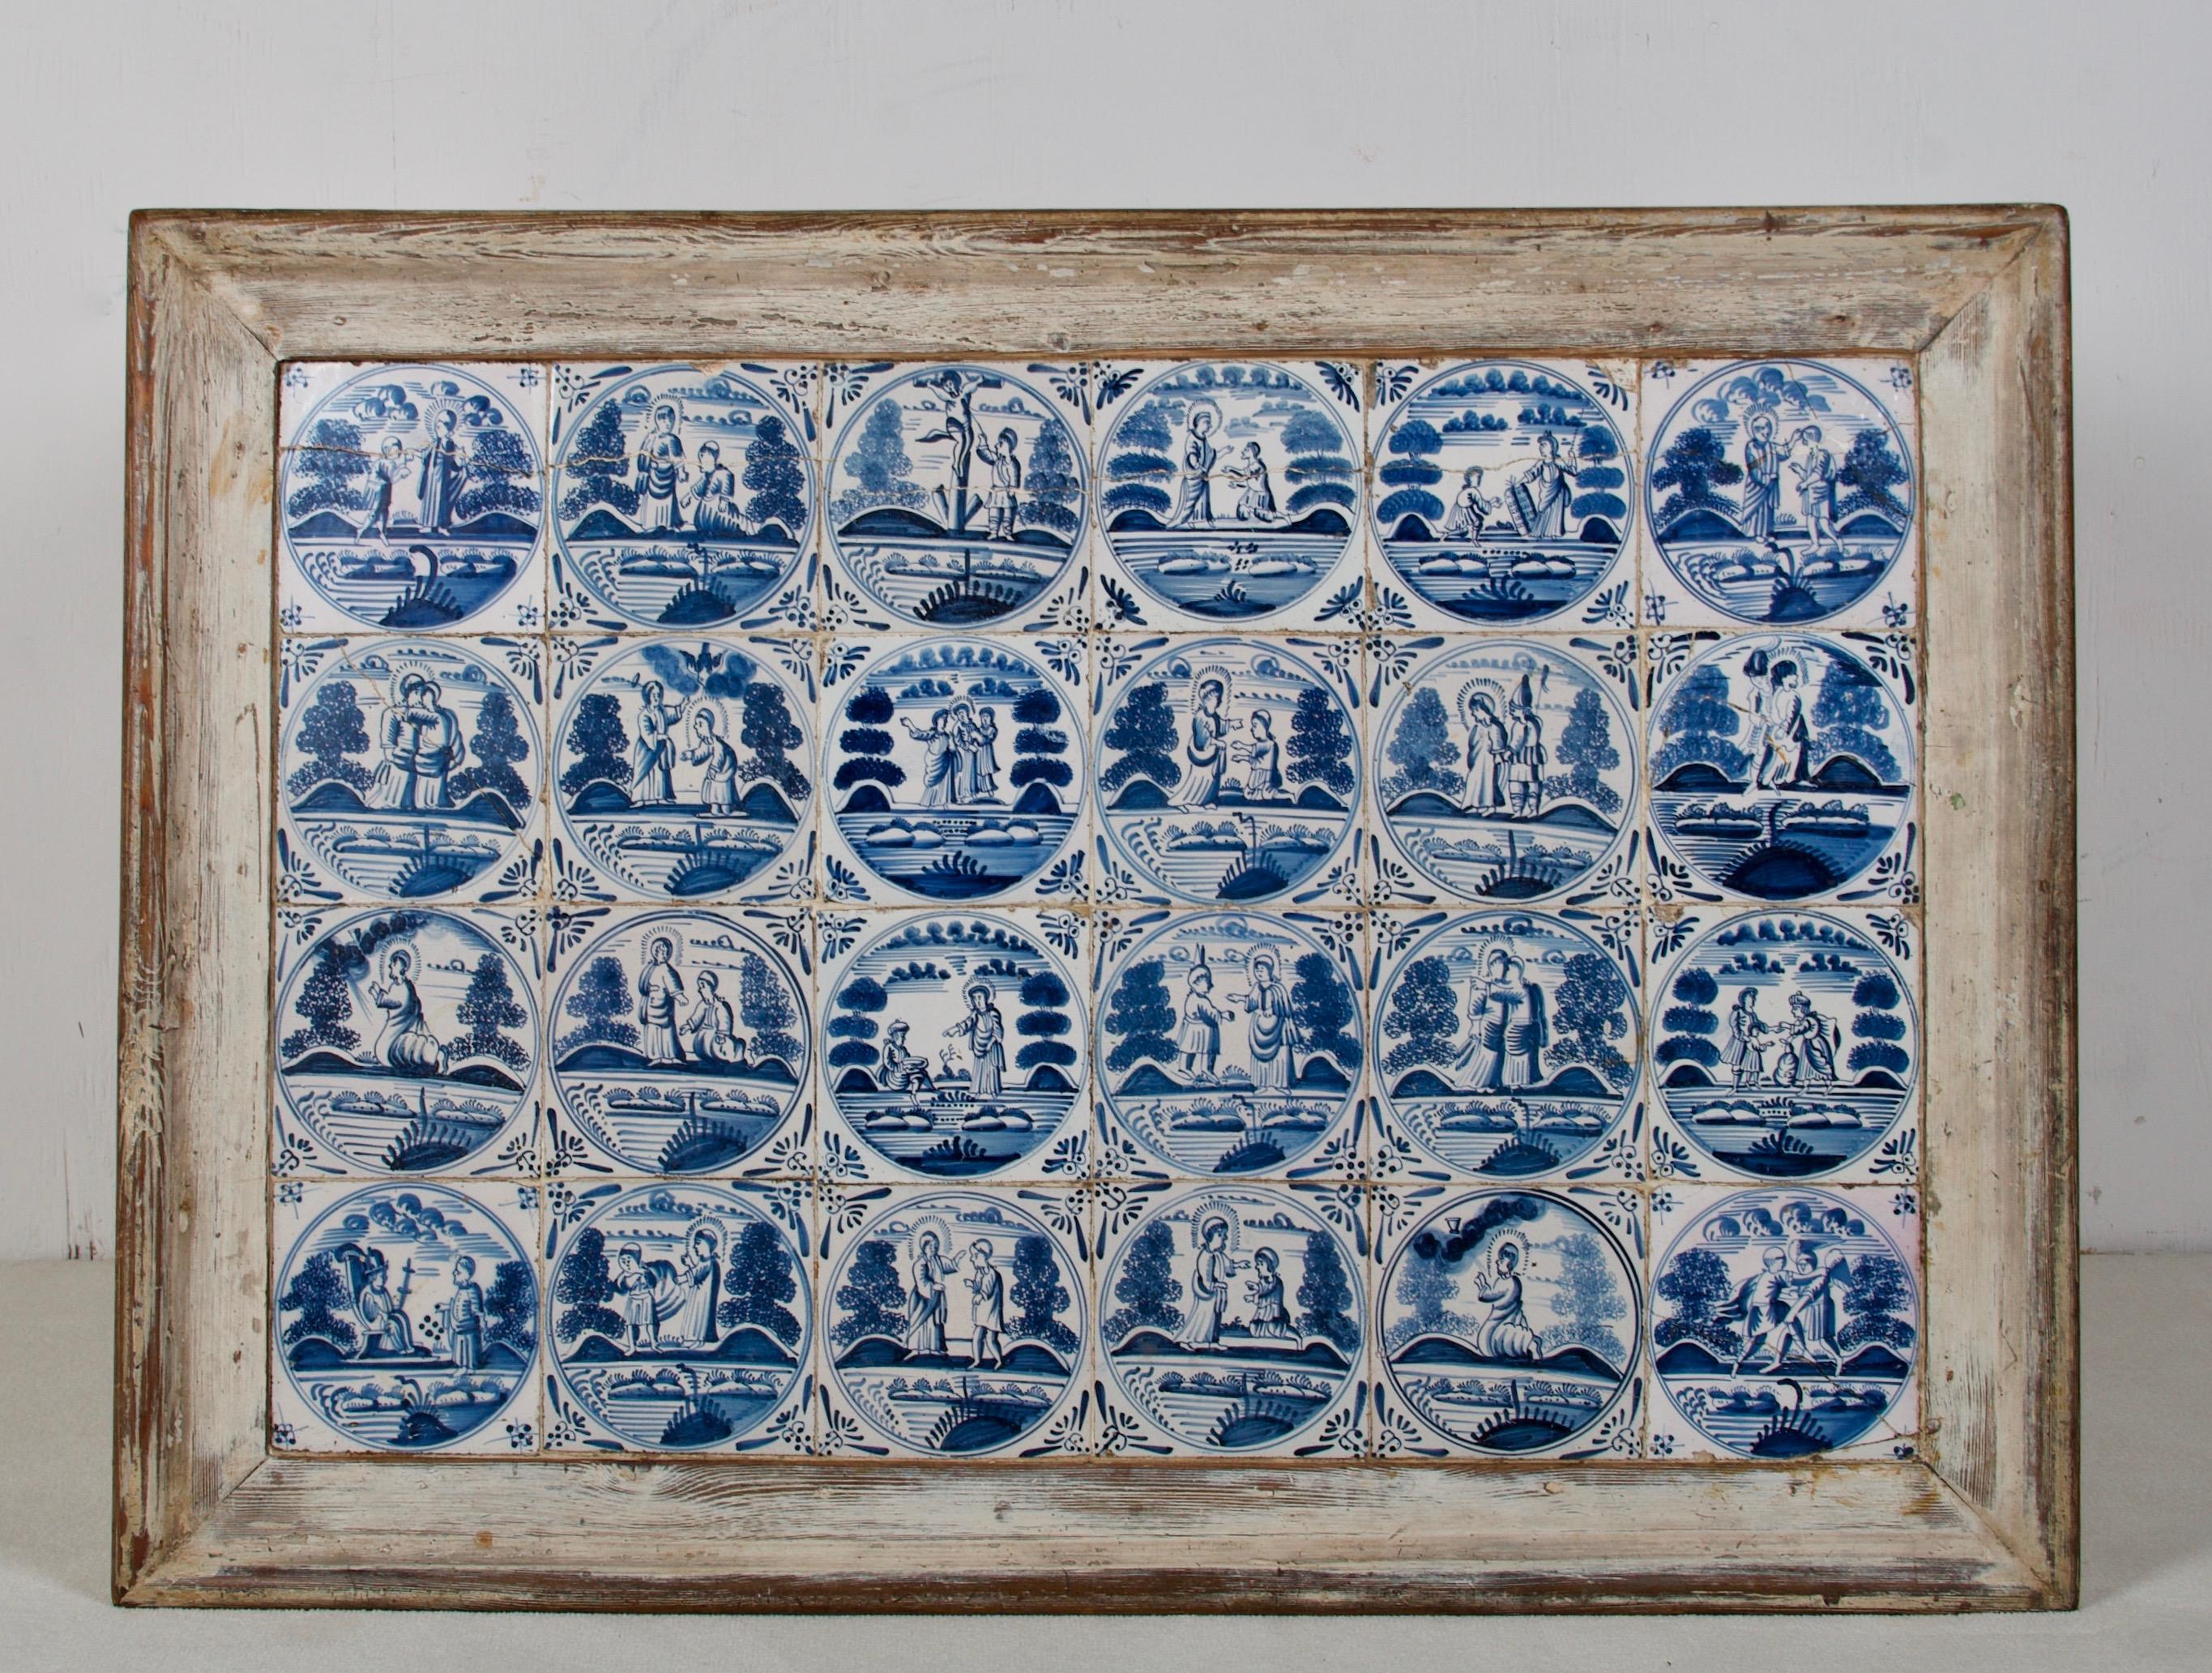 17th Cent. Delft Tile Inset into a 18th Cent. Dutch Side Table with Paint Decor 3